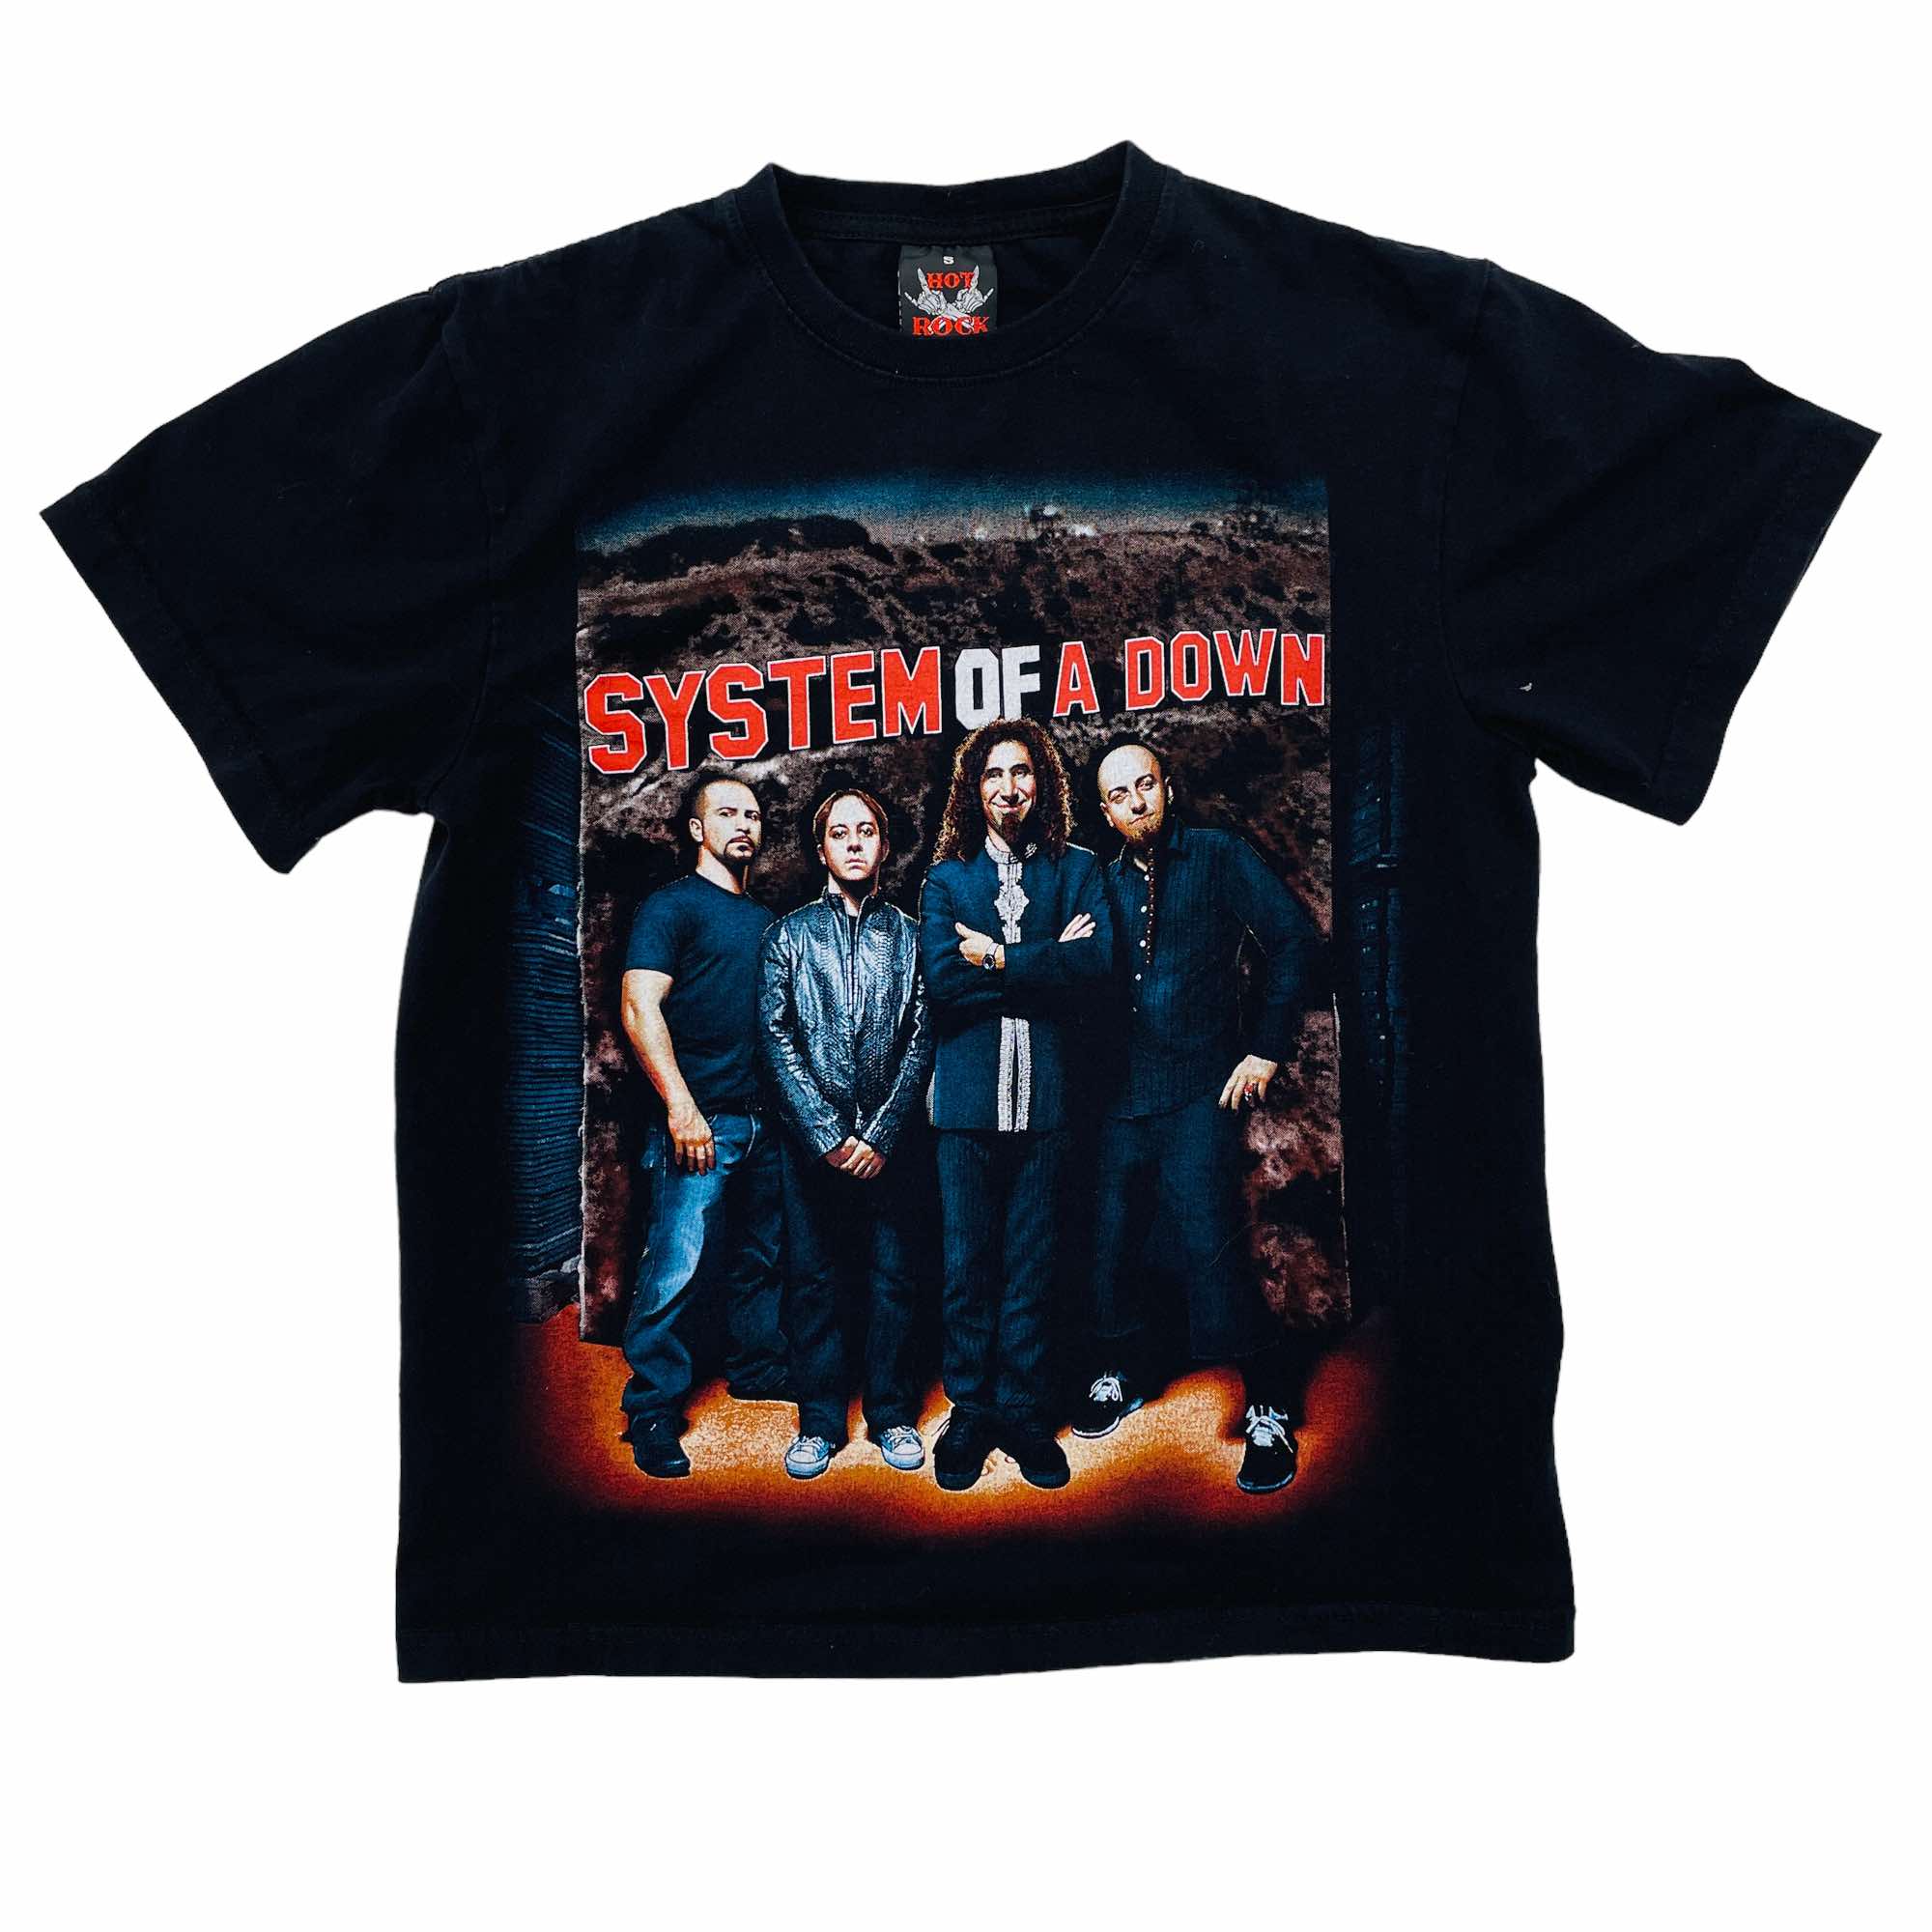 System of a Down T-Shirt - XS